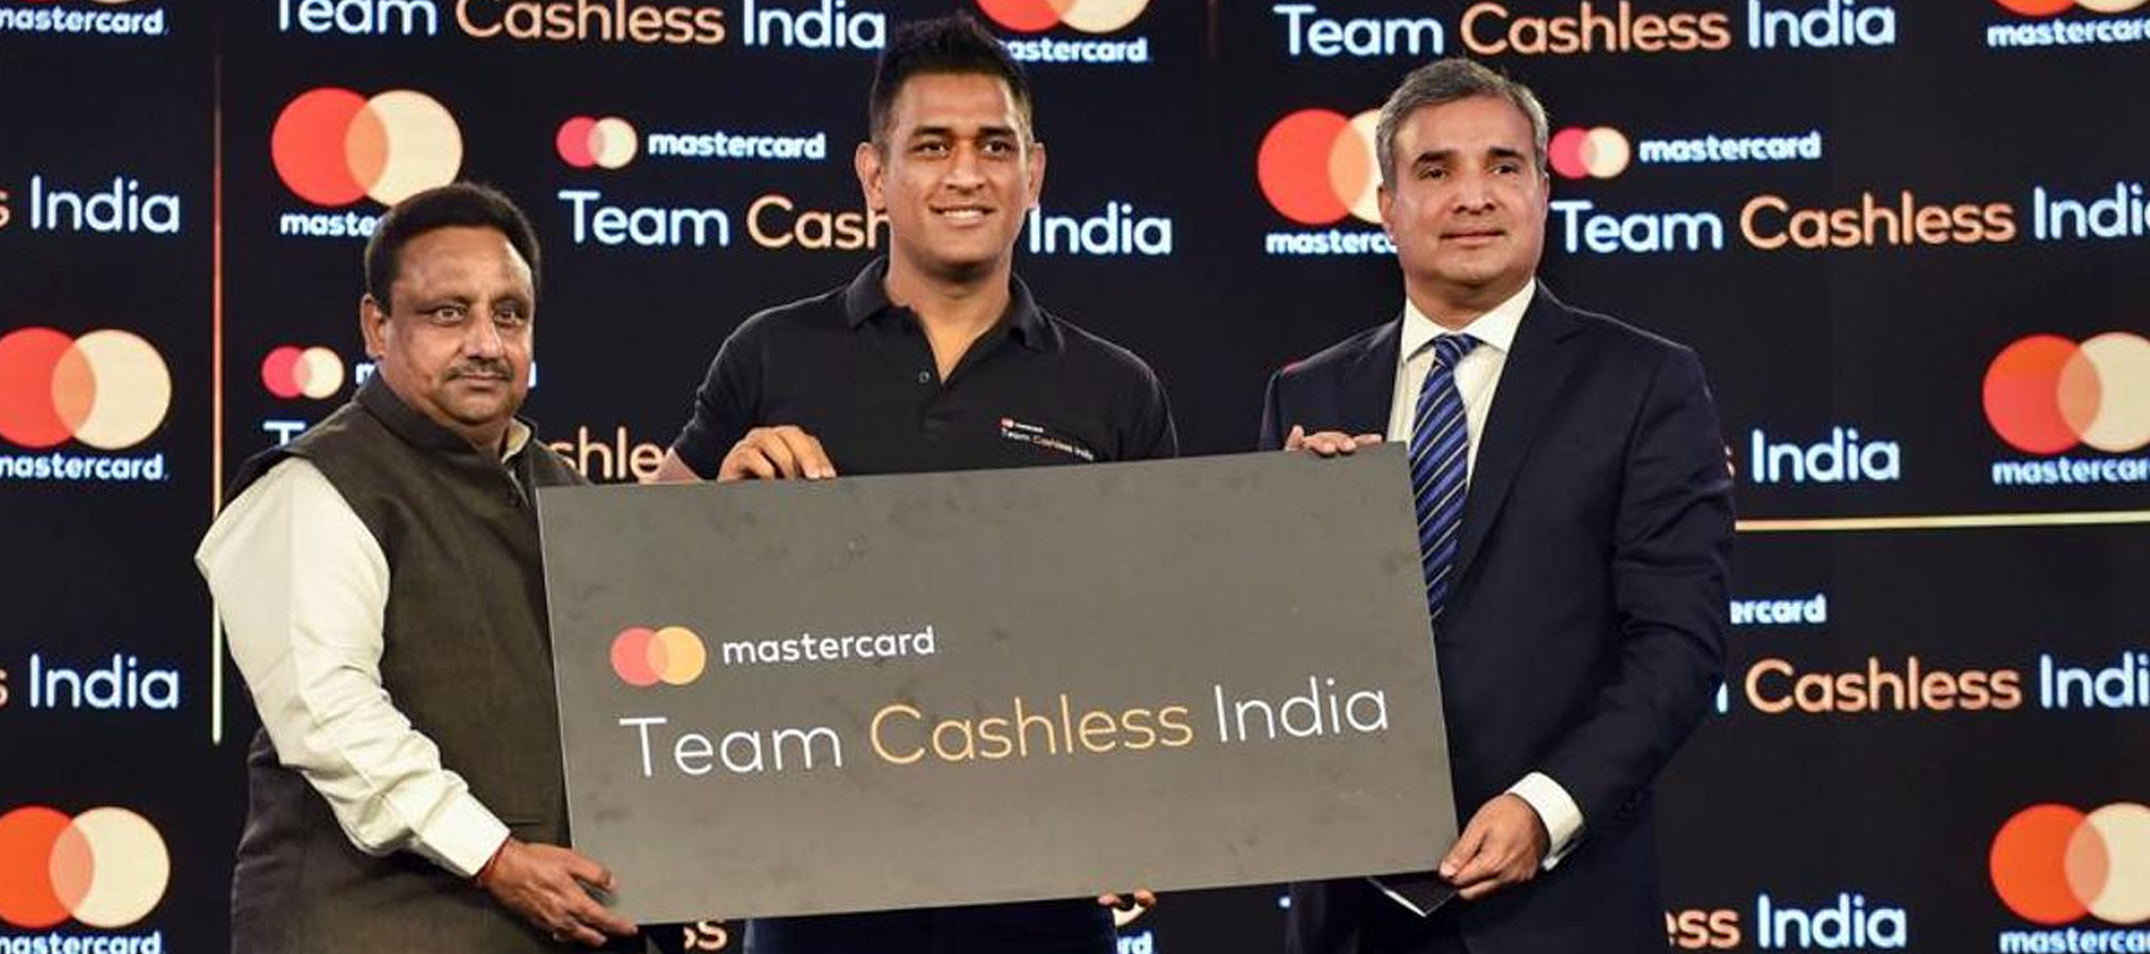 Mastercard and MS Dhoni partner to build ‘Team Cashless India’